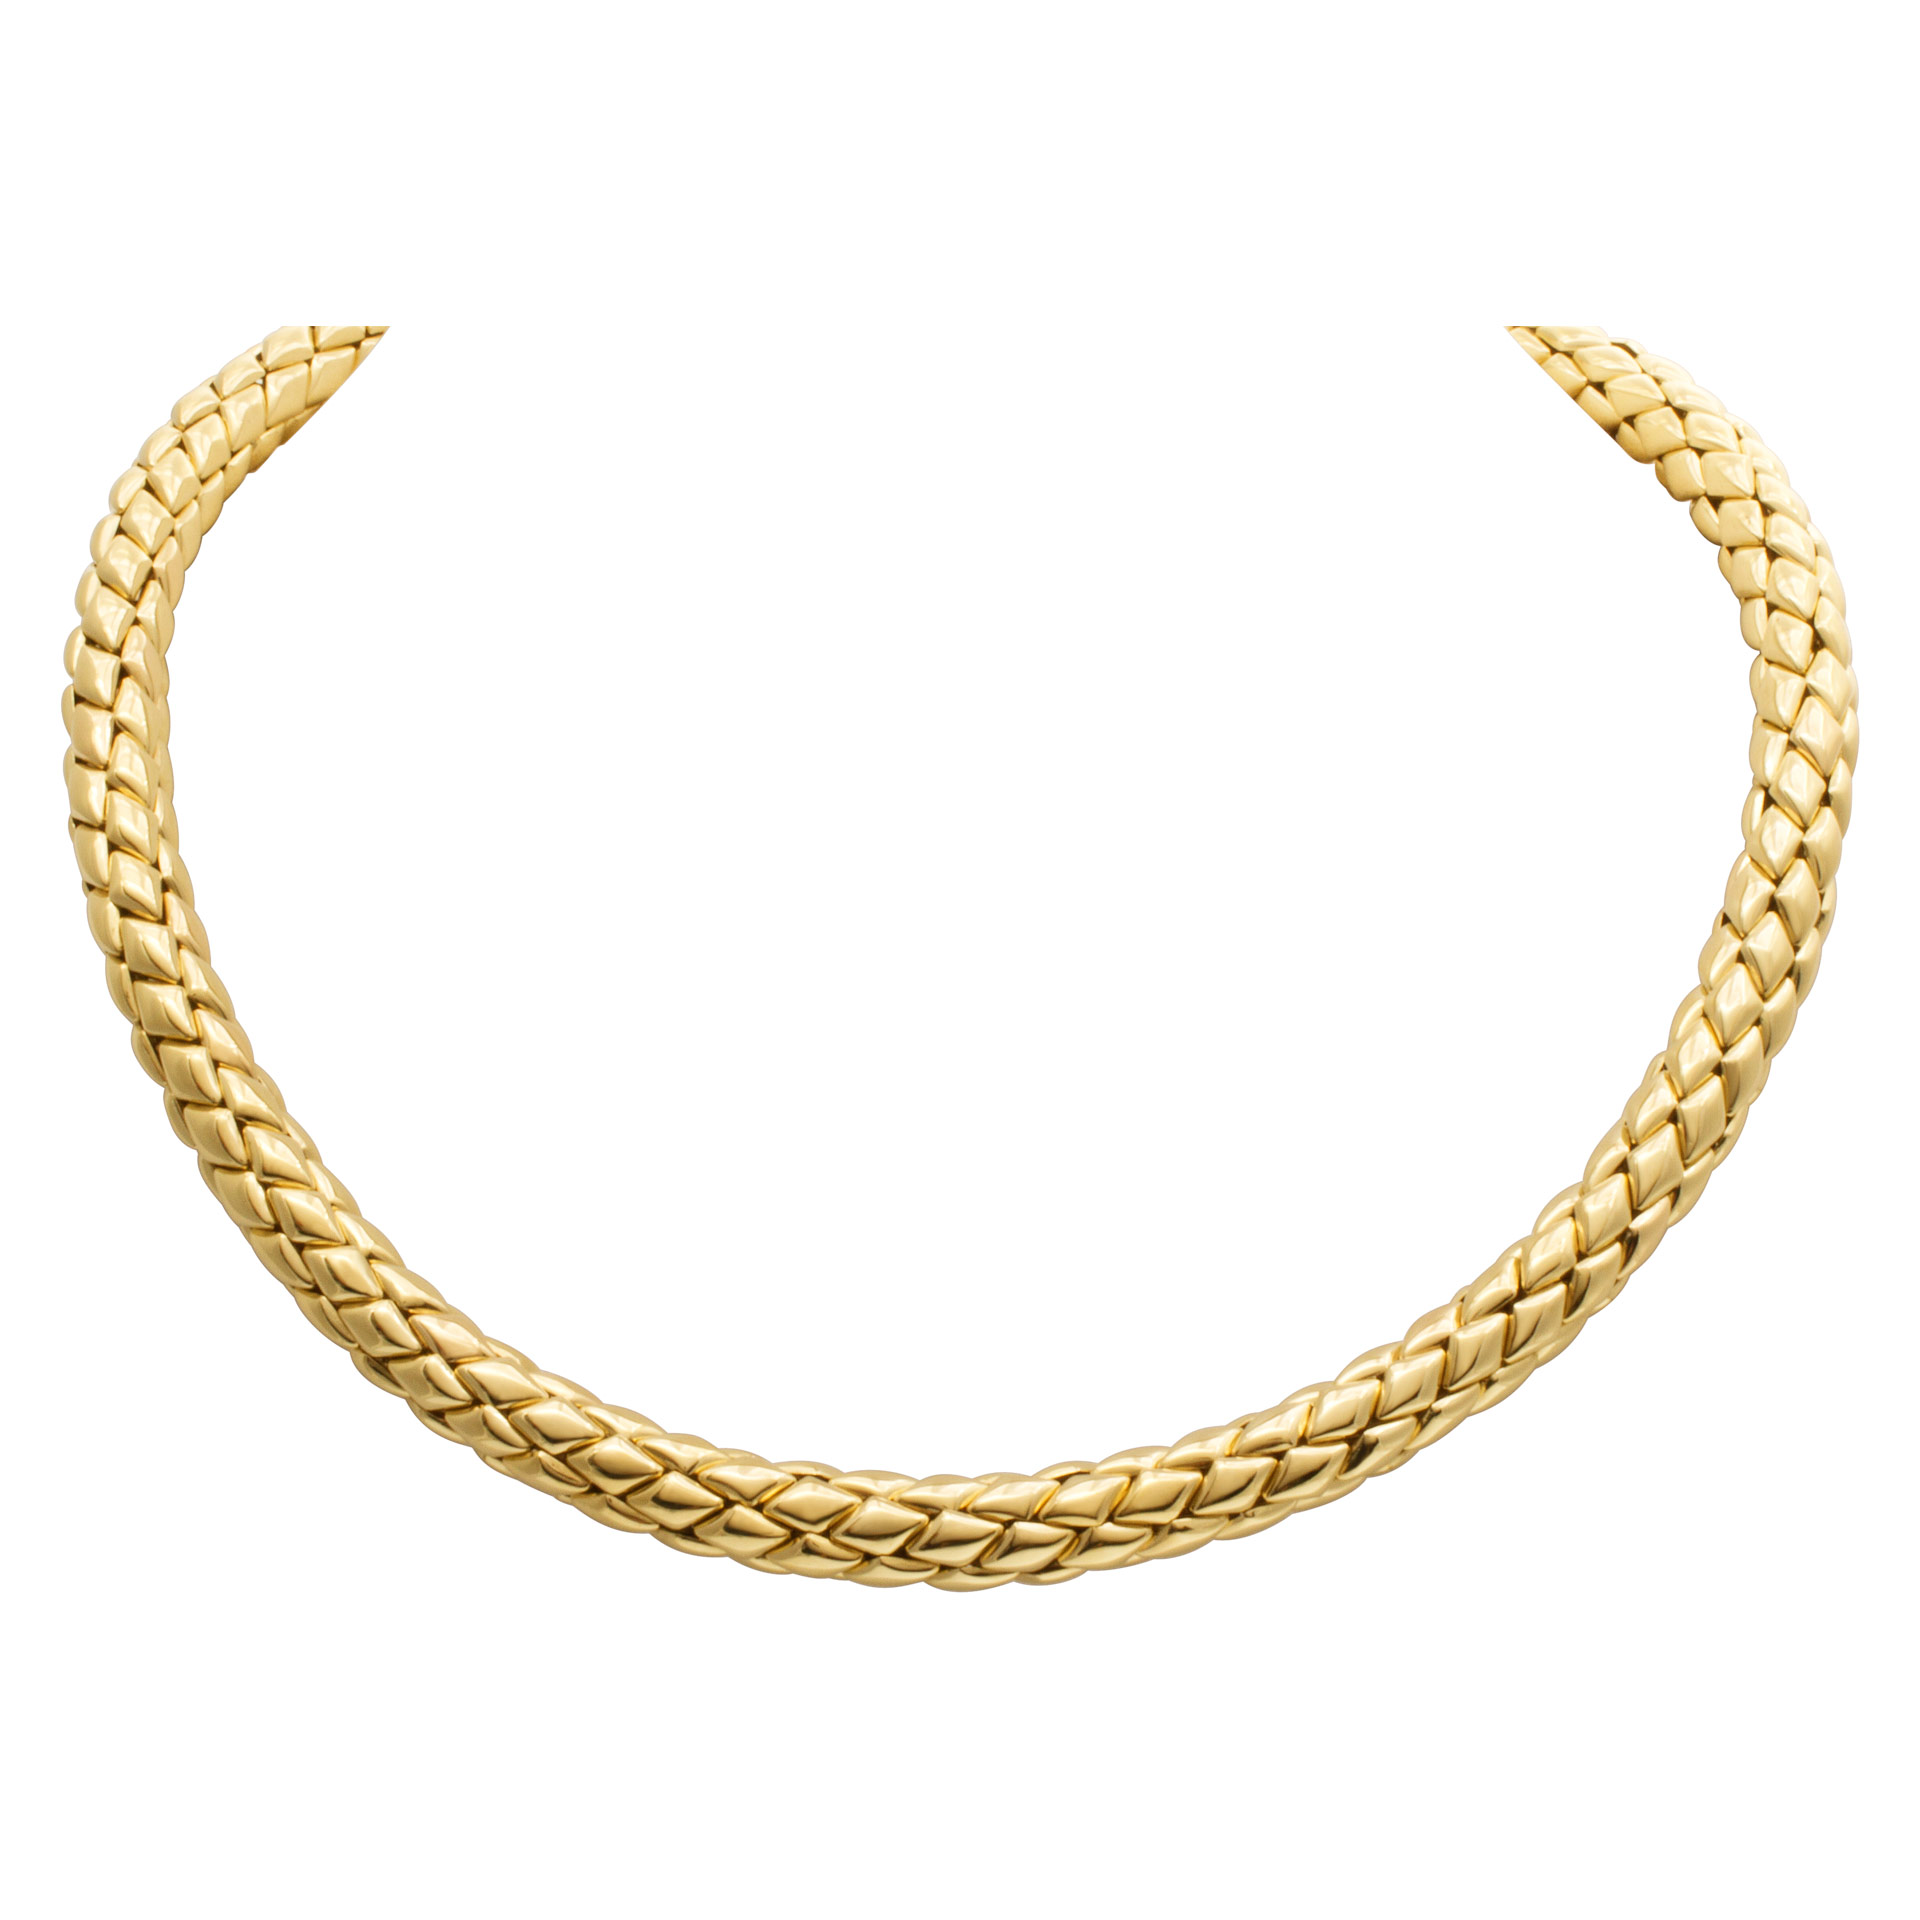 Chimento weave basket necklace in 18k yellow gold